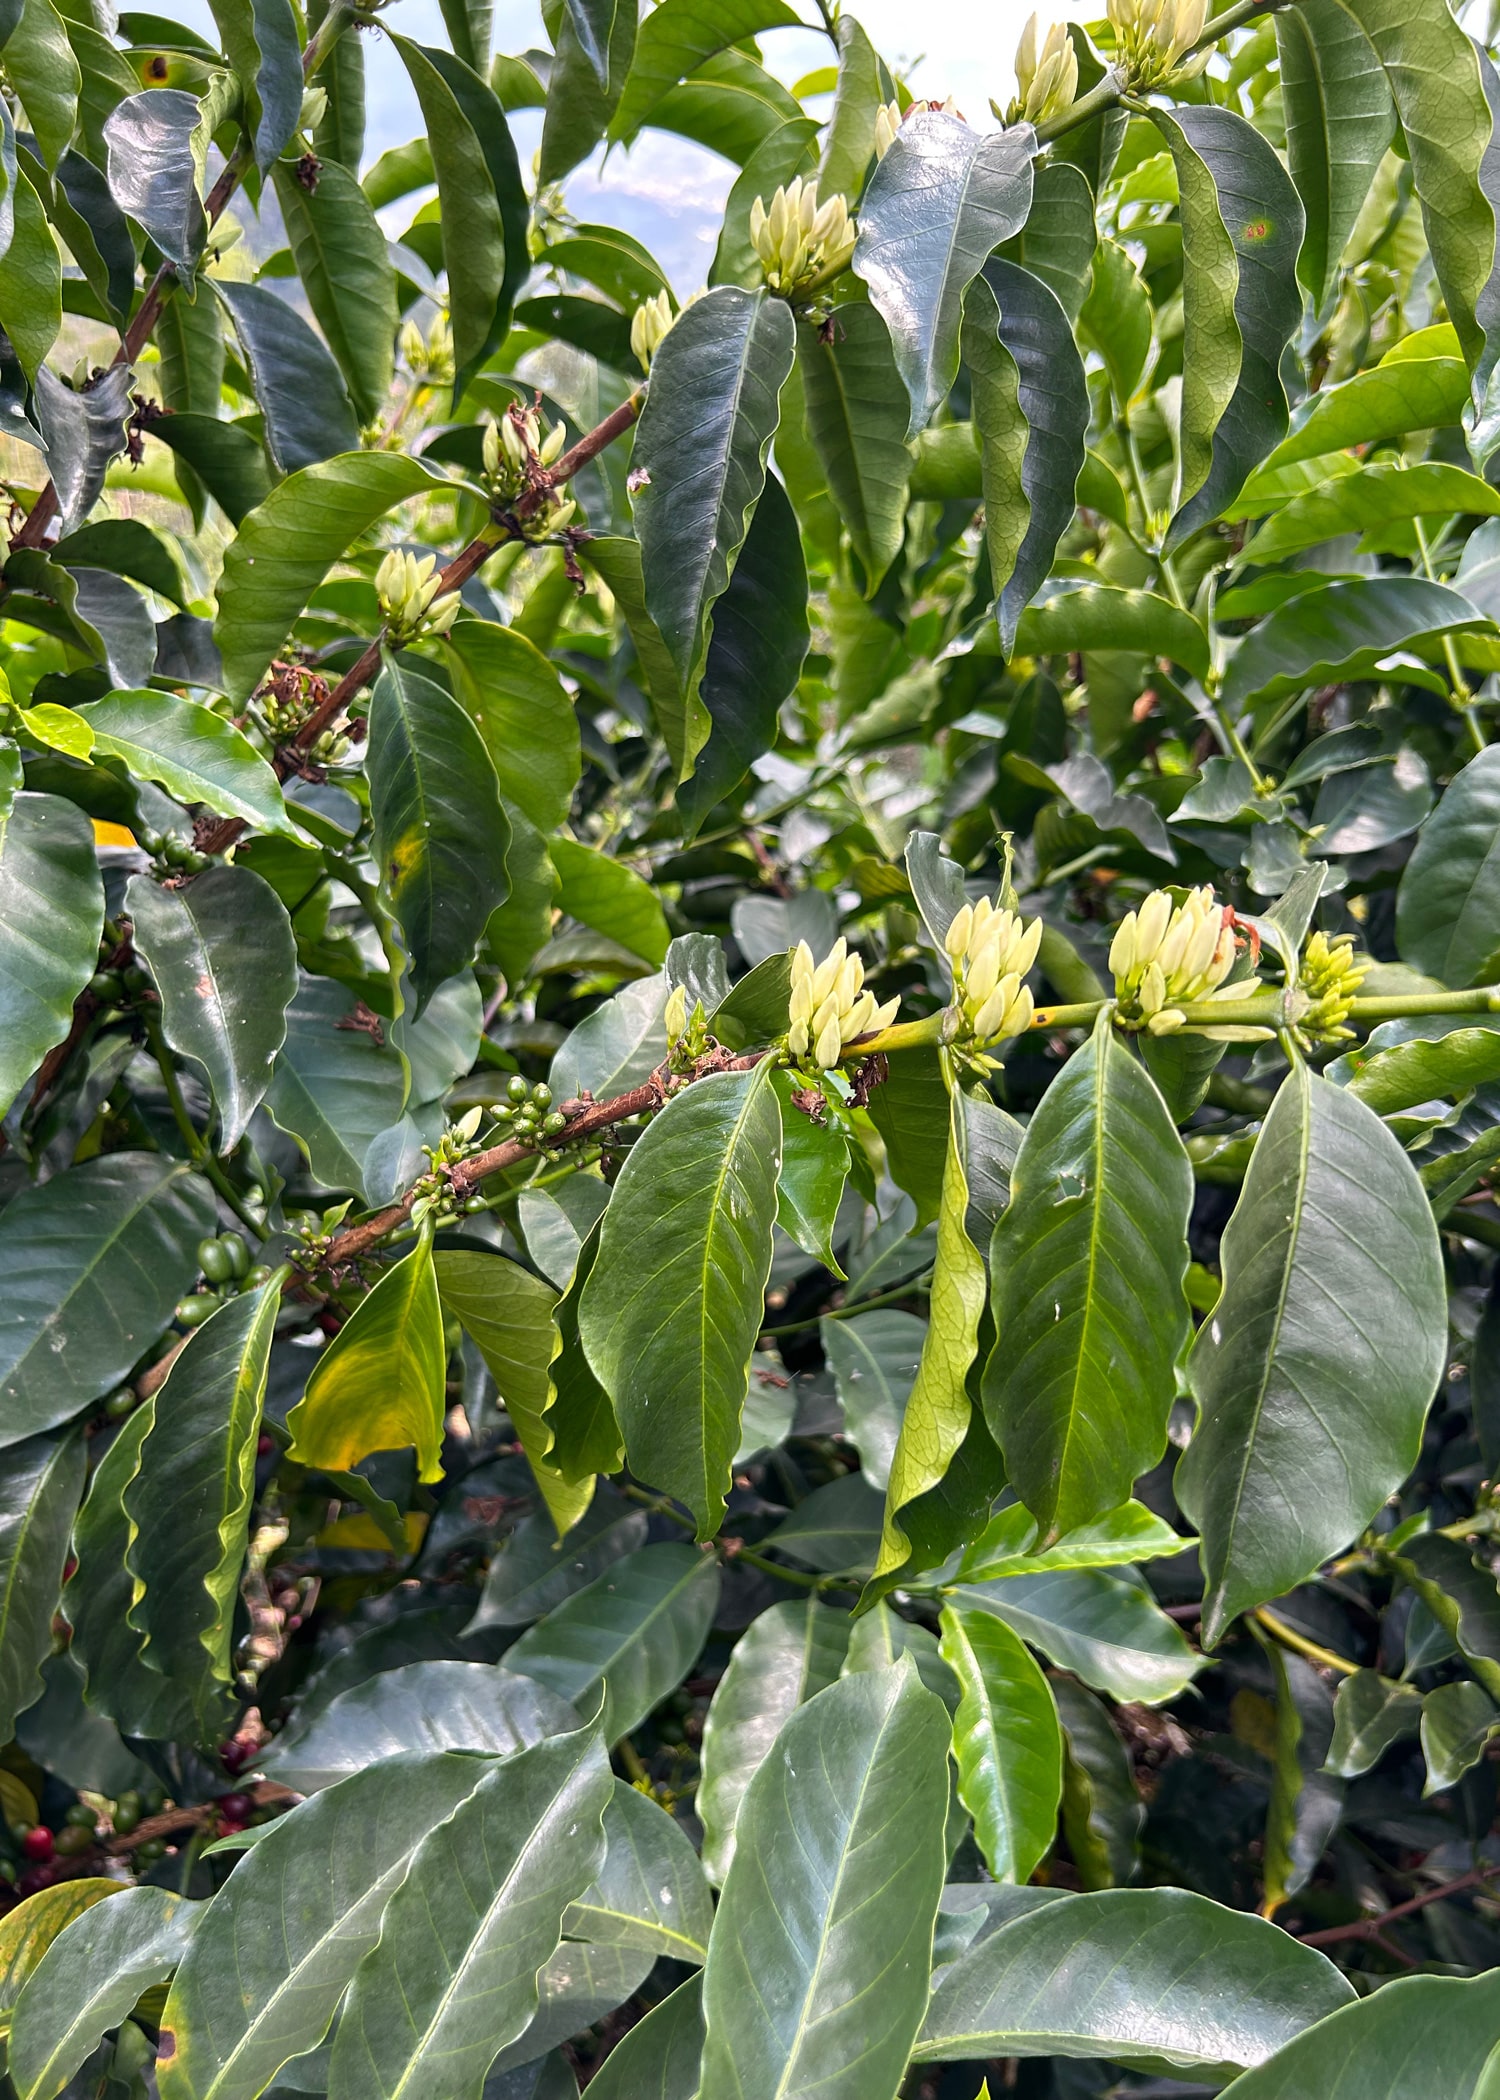 A picture of leaves on a coffee tree starting to fold inward, indicating the beginning of hibernation.